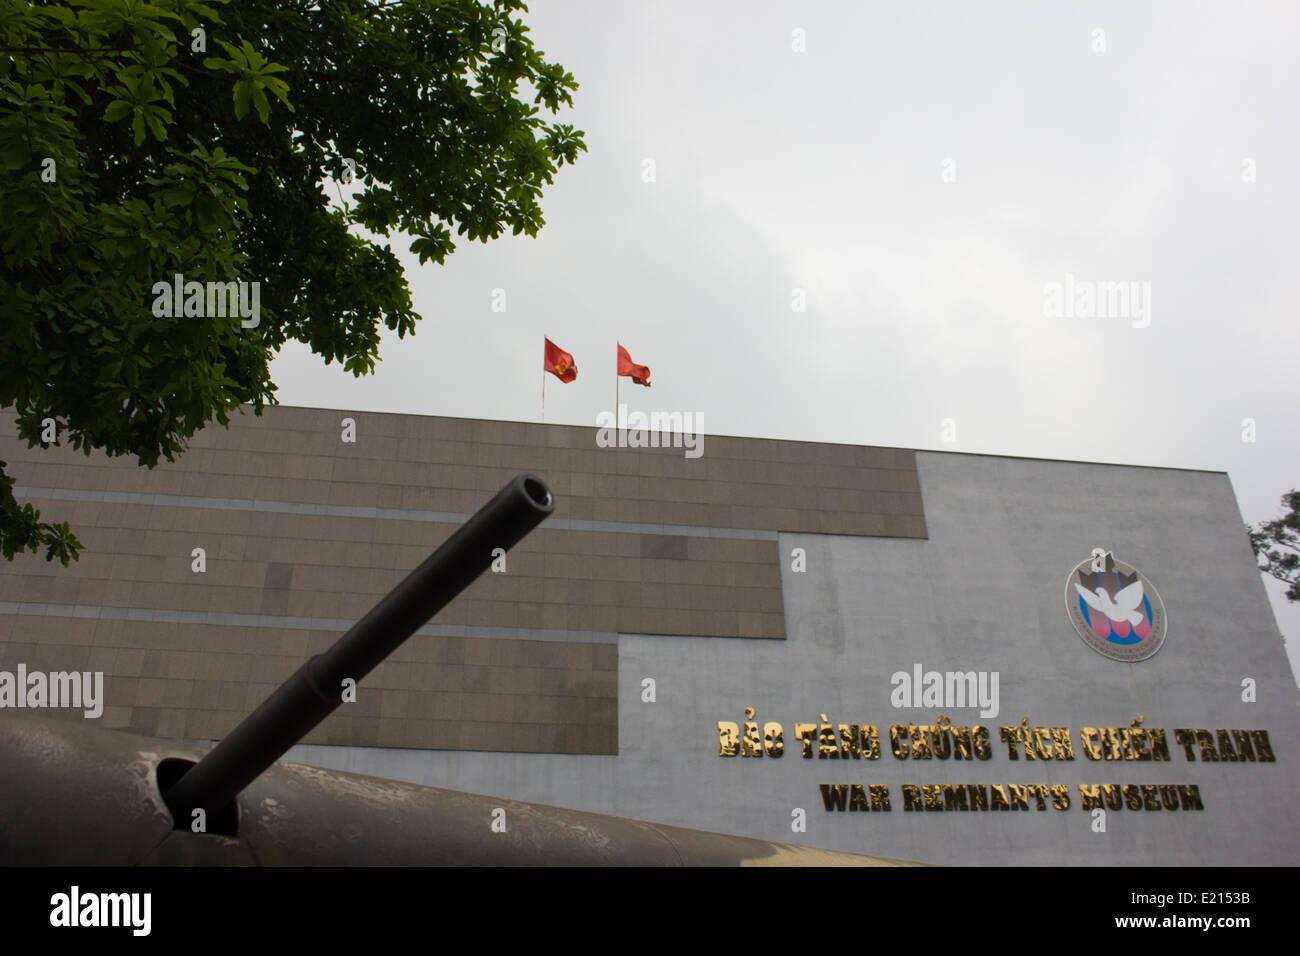 The War Remnants Museum in Ho Chi Minh City, Vietnam showcases the horrors of the Vietnam War. Stock Photo